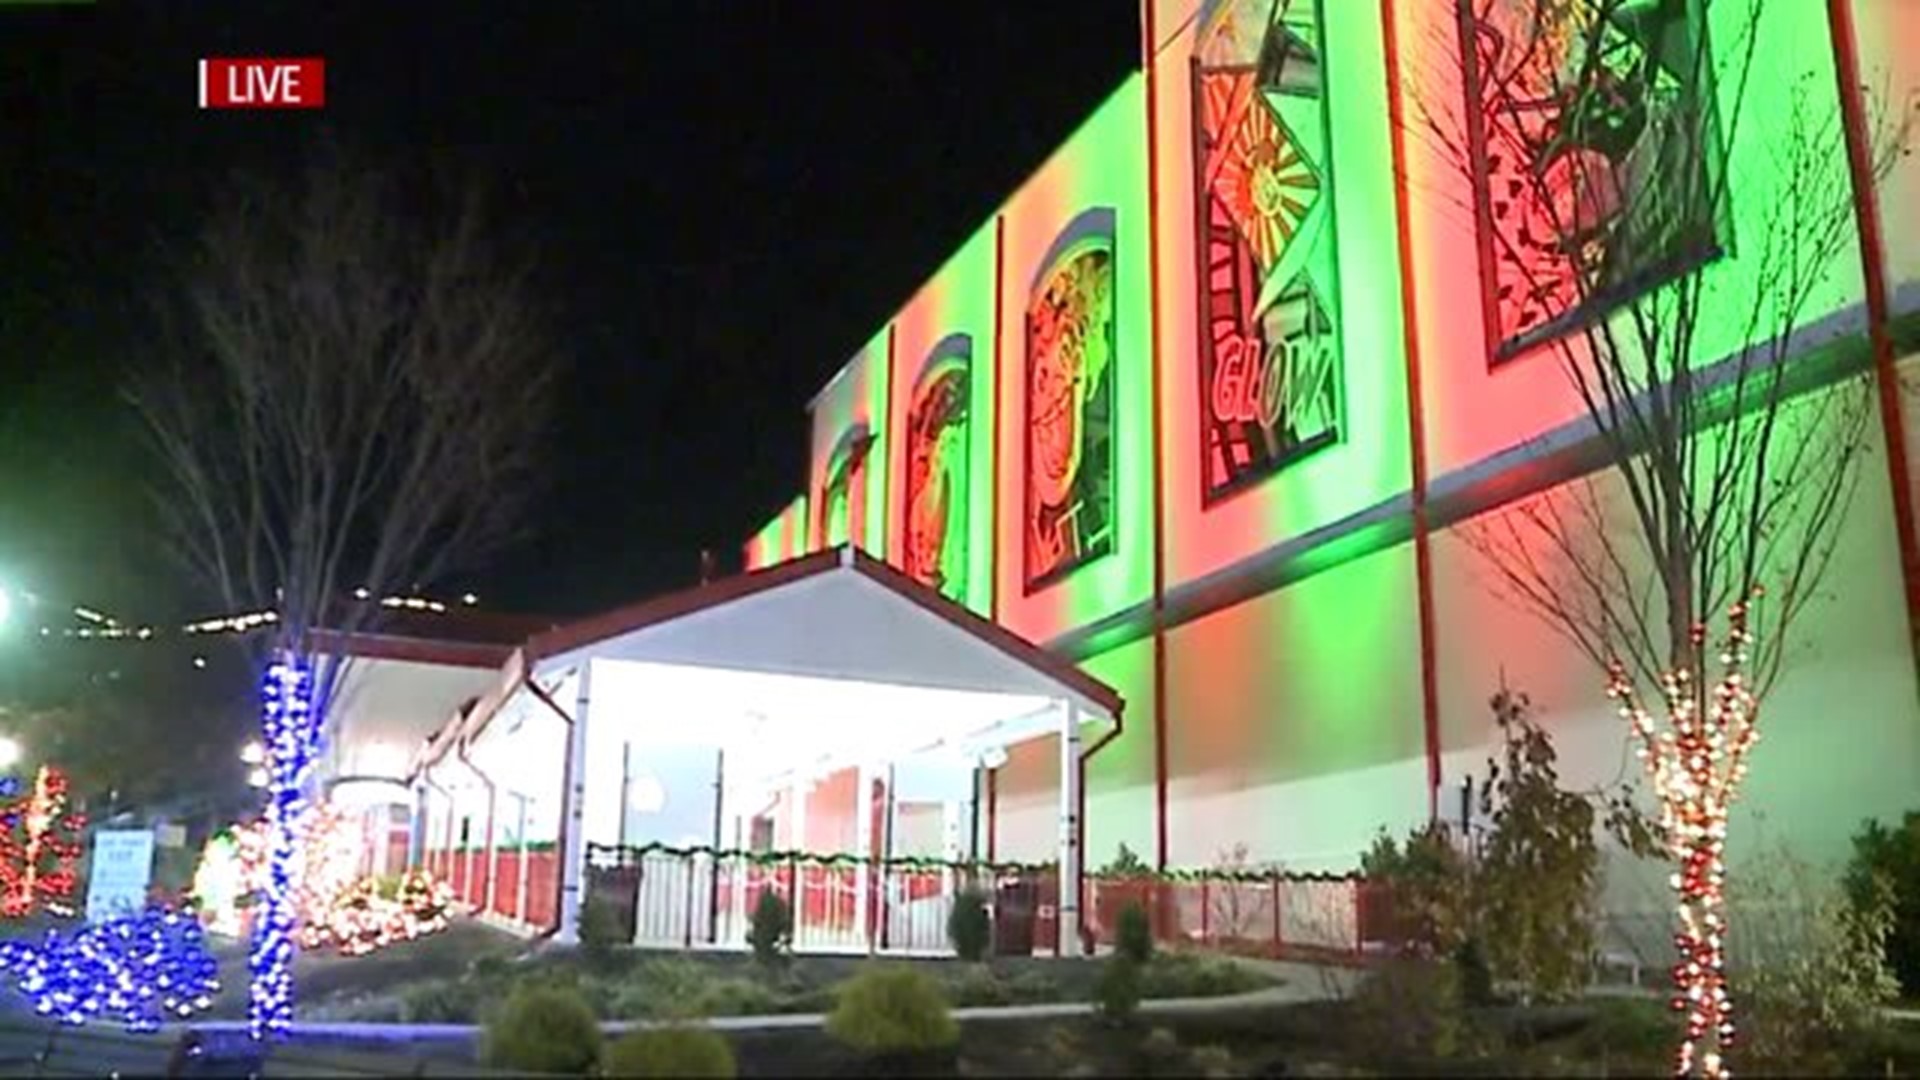 Feel the holiday spirit at Candylane in Hershey